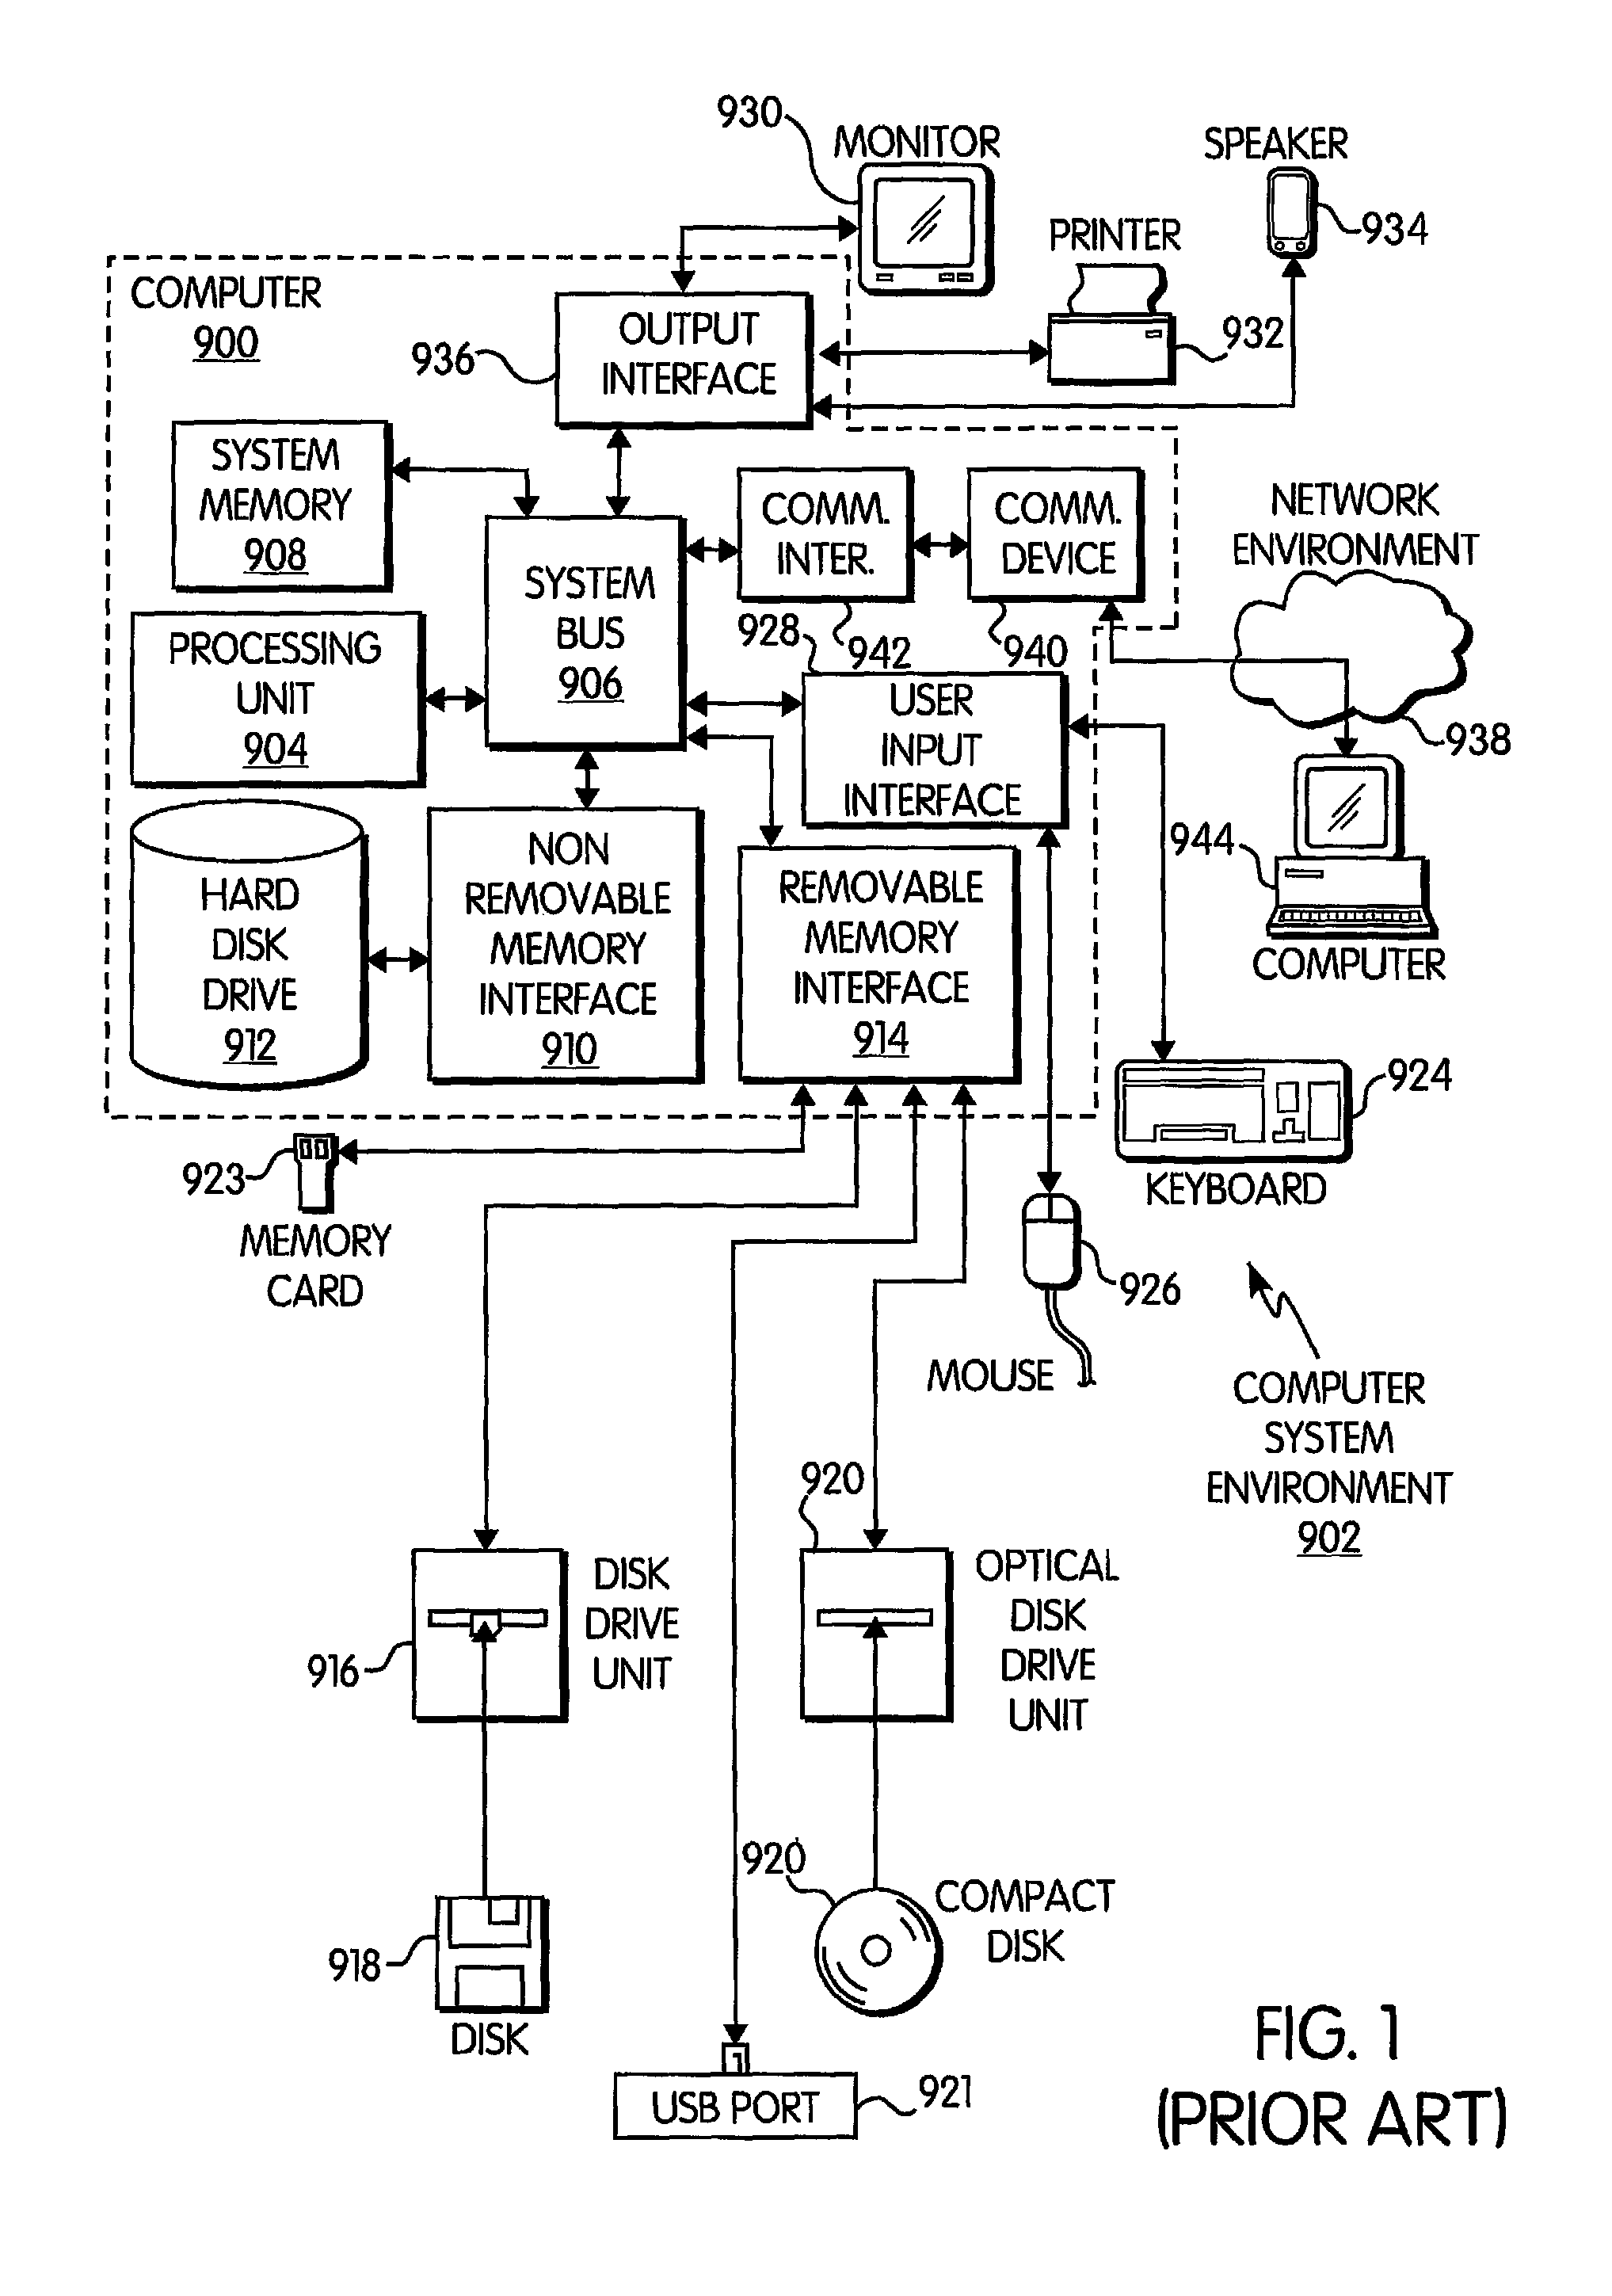 Braking systems and methods of determining a safety factor for a braking model for a train